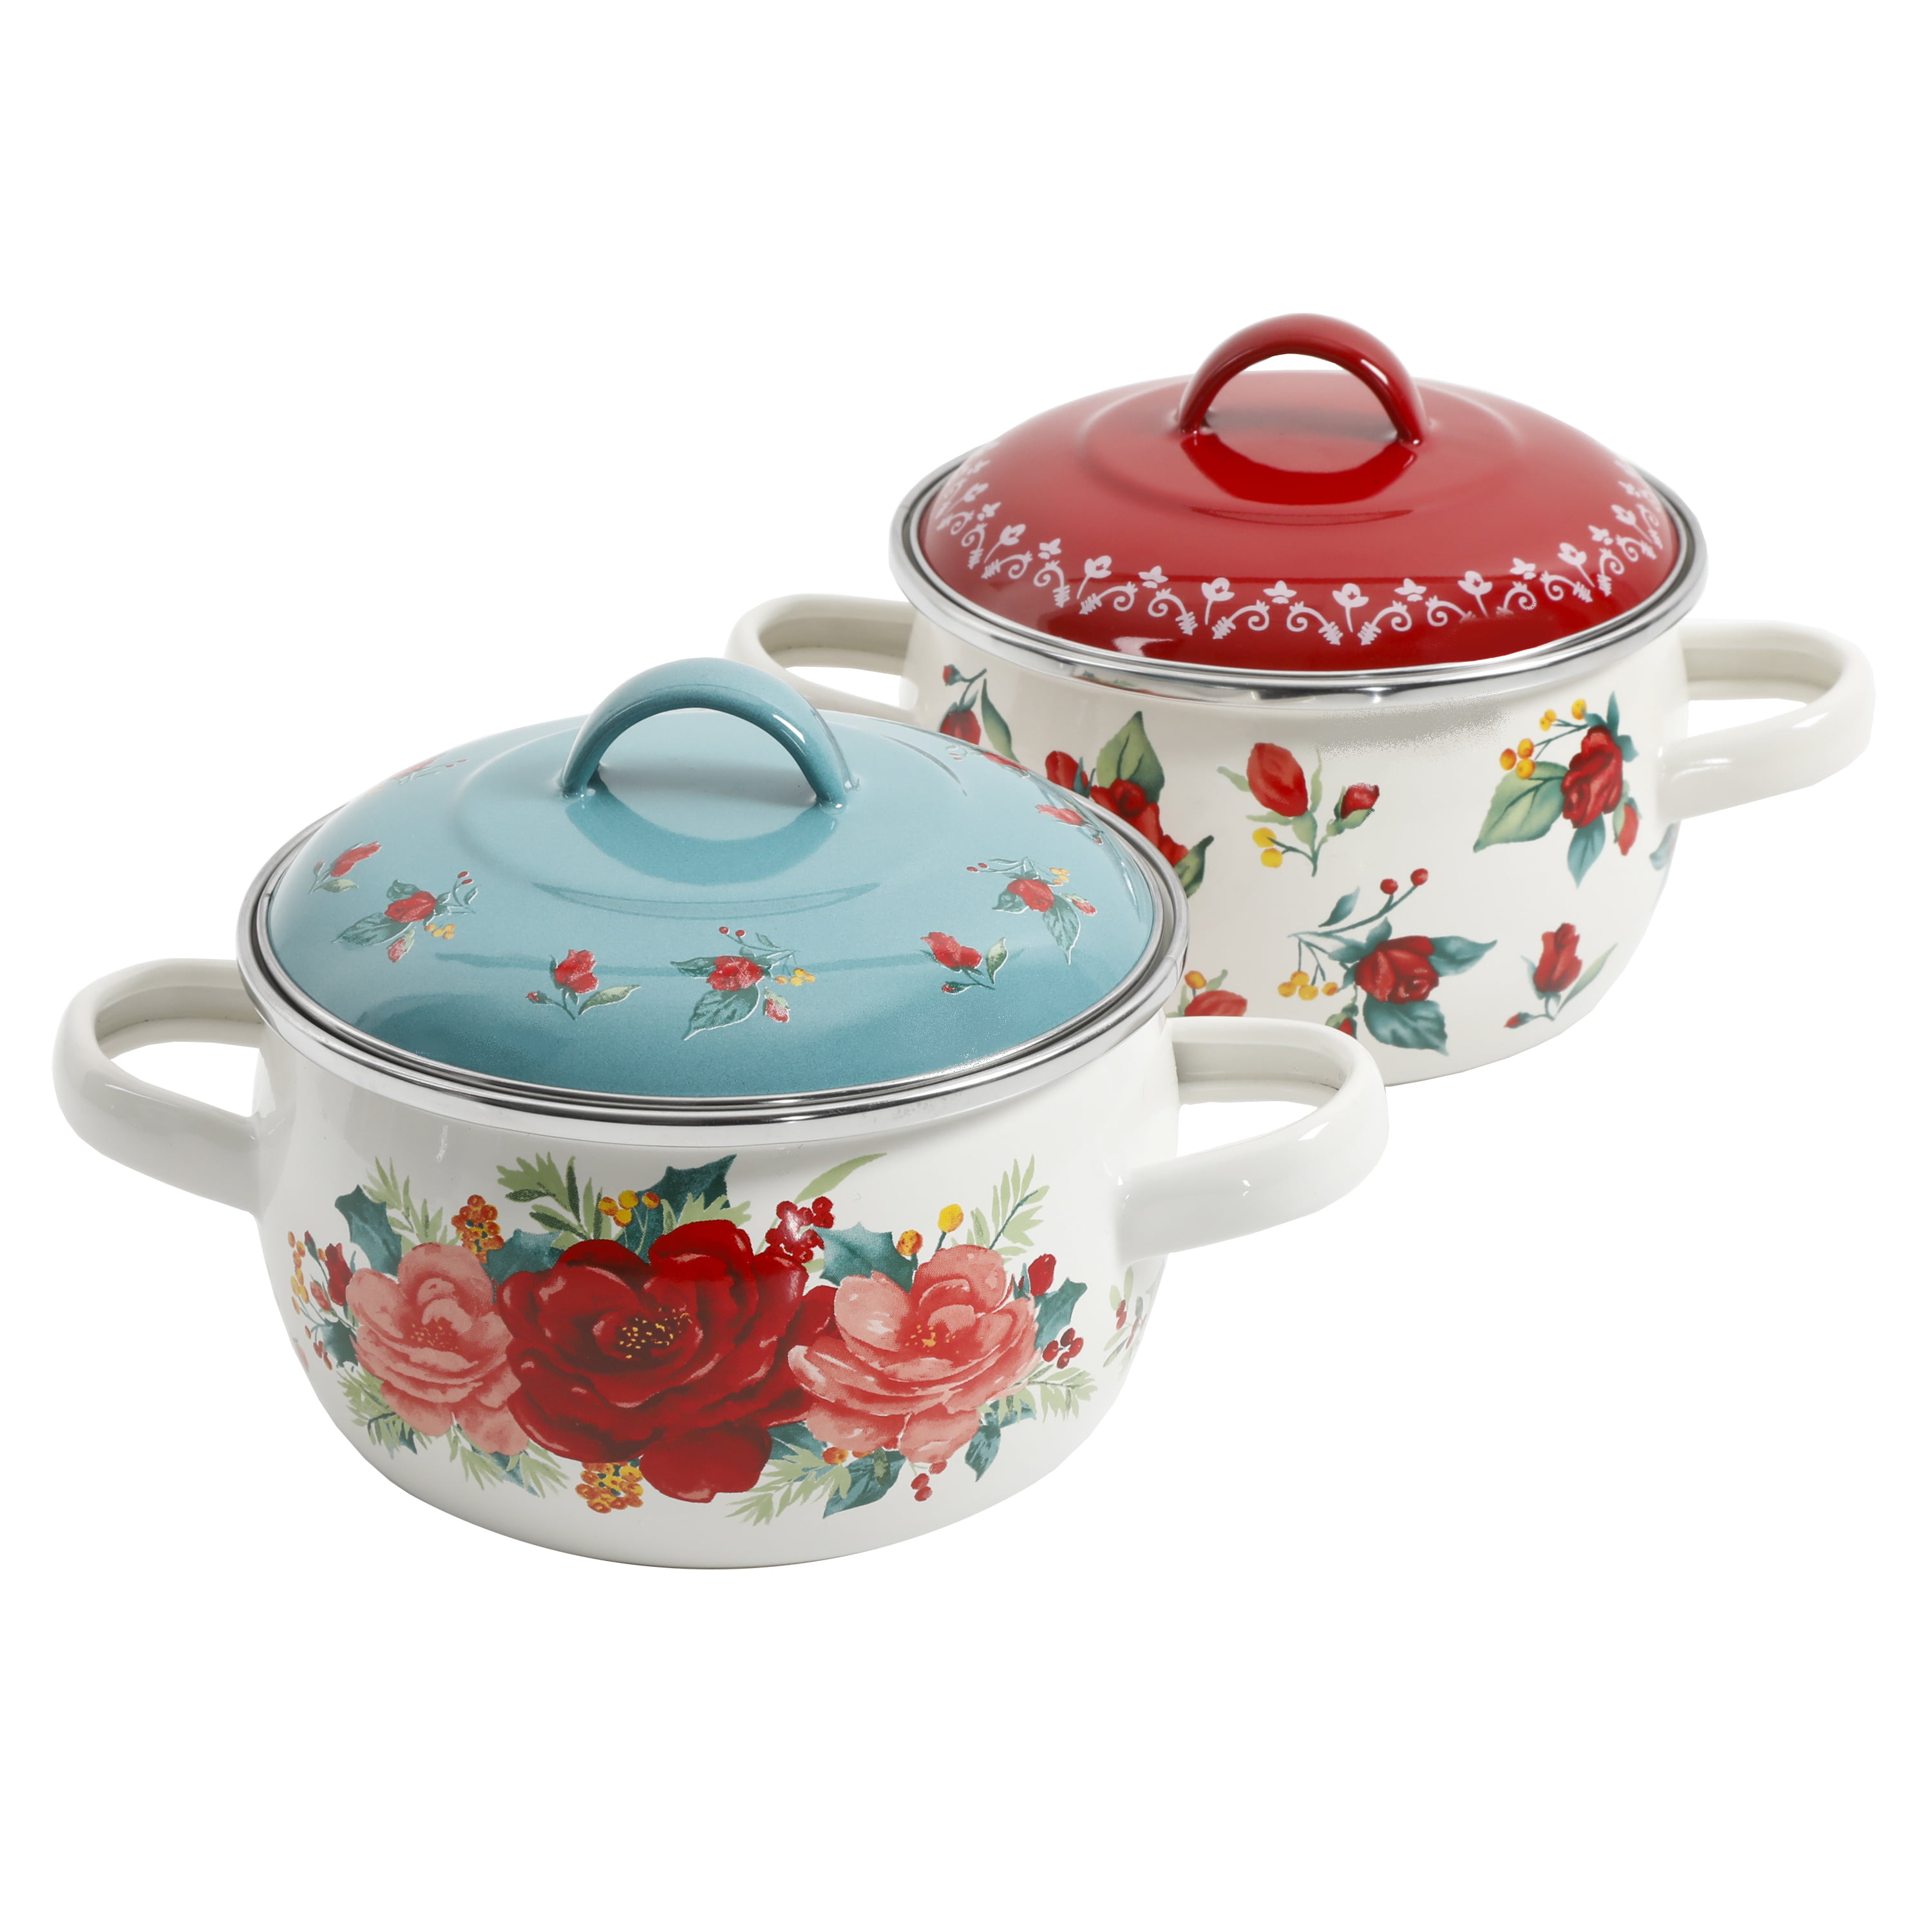 The Pioneer Woman Cheerful Rose Mini Dutch Ovens, Set of 2